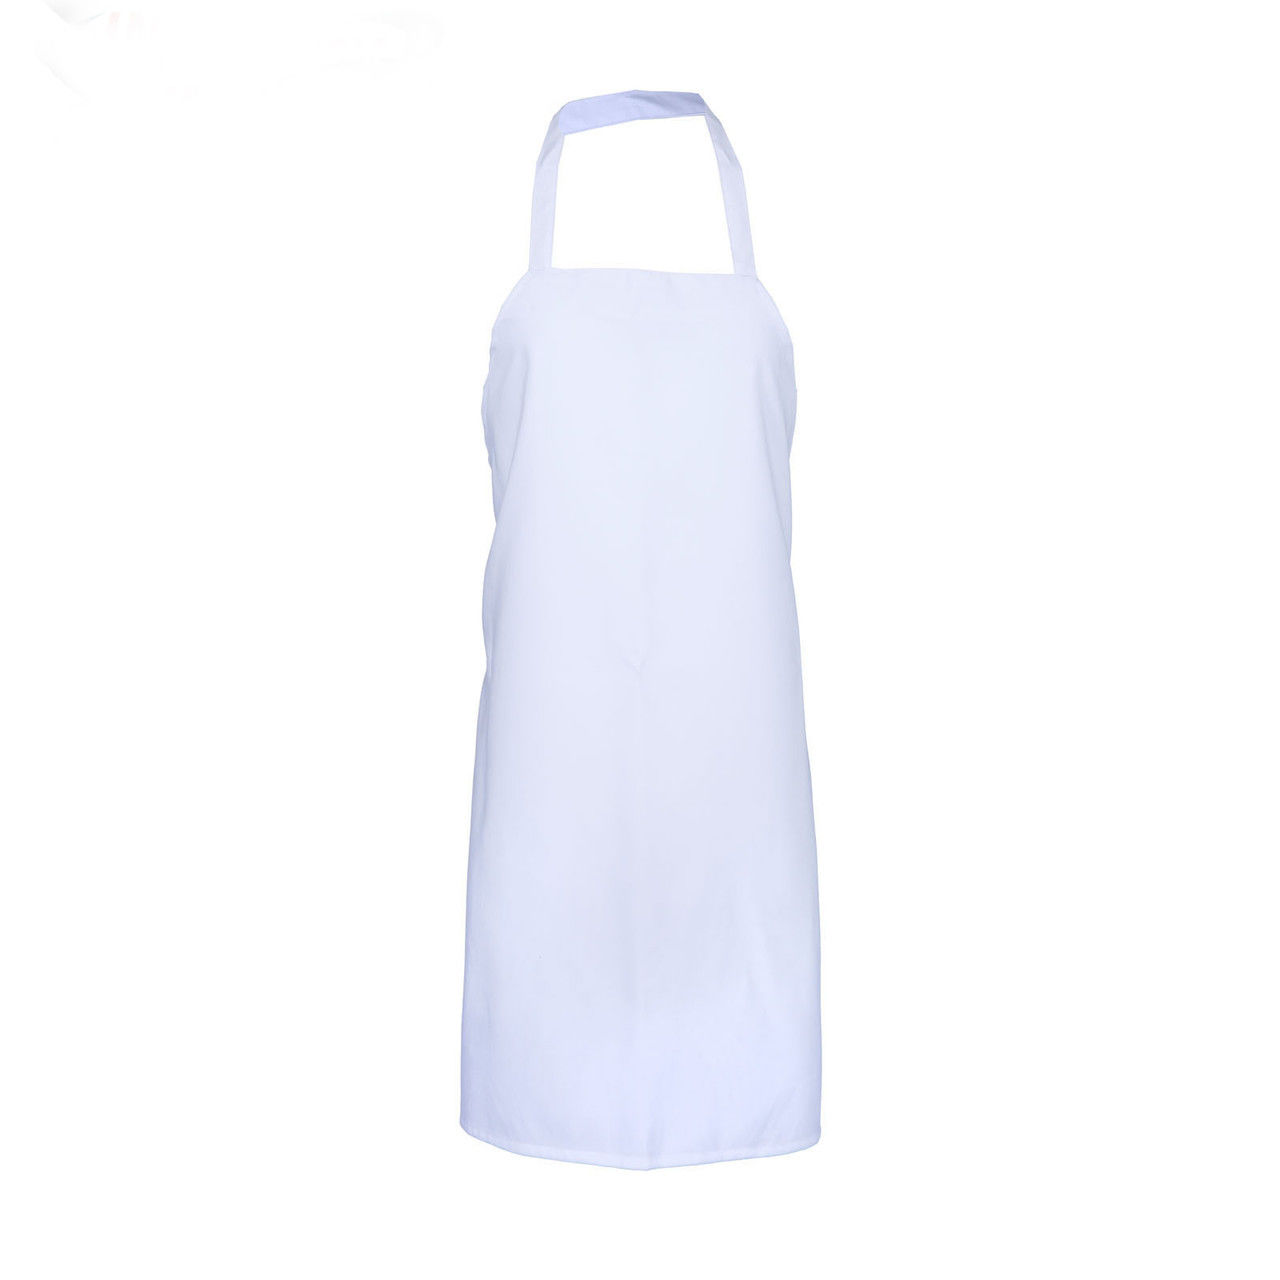 Is the Basic Bib Apron sold by Pinnacle Textile?